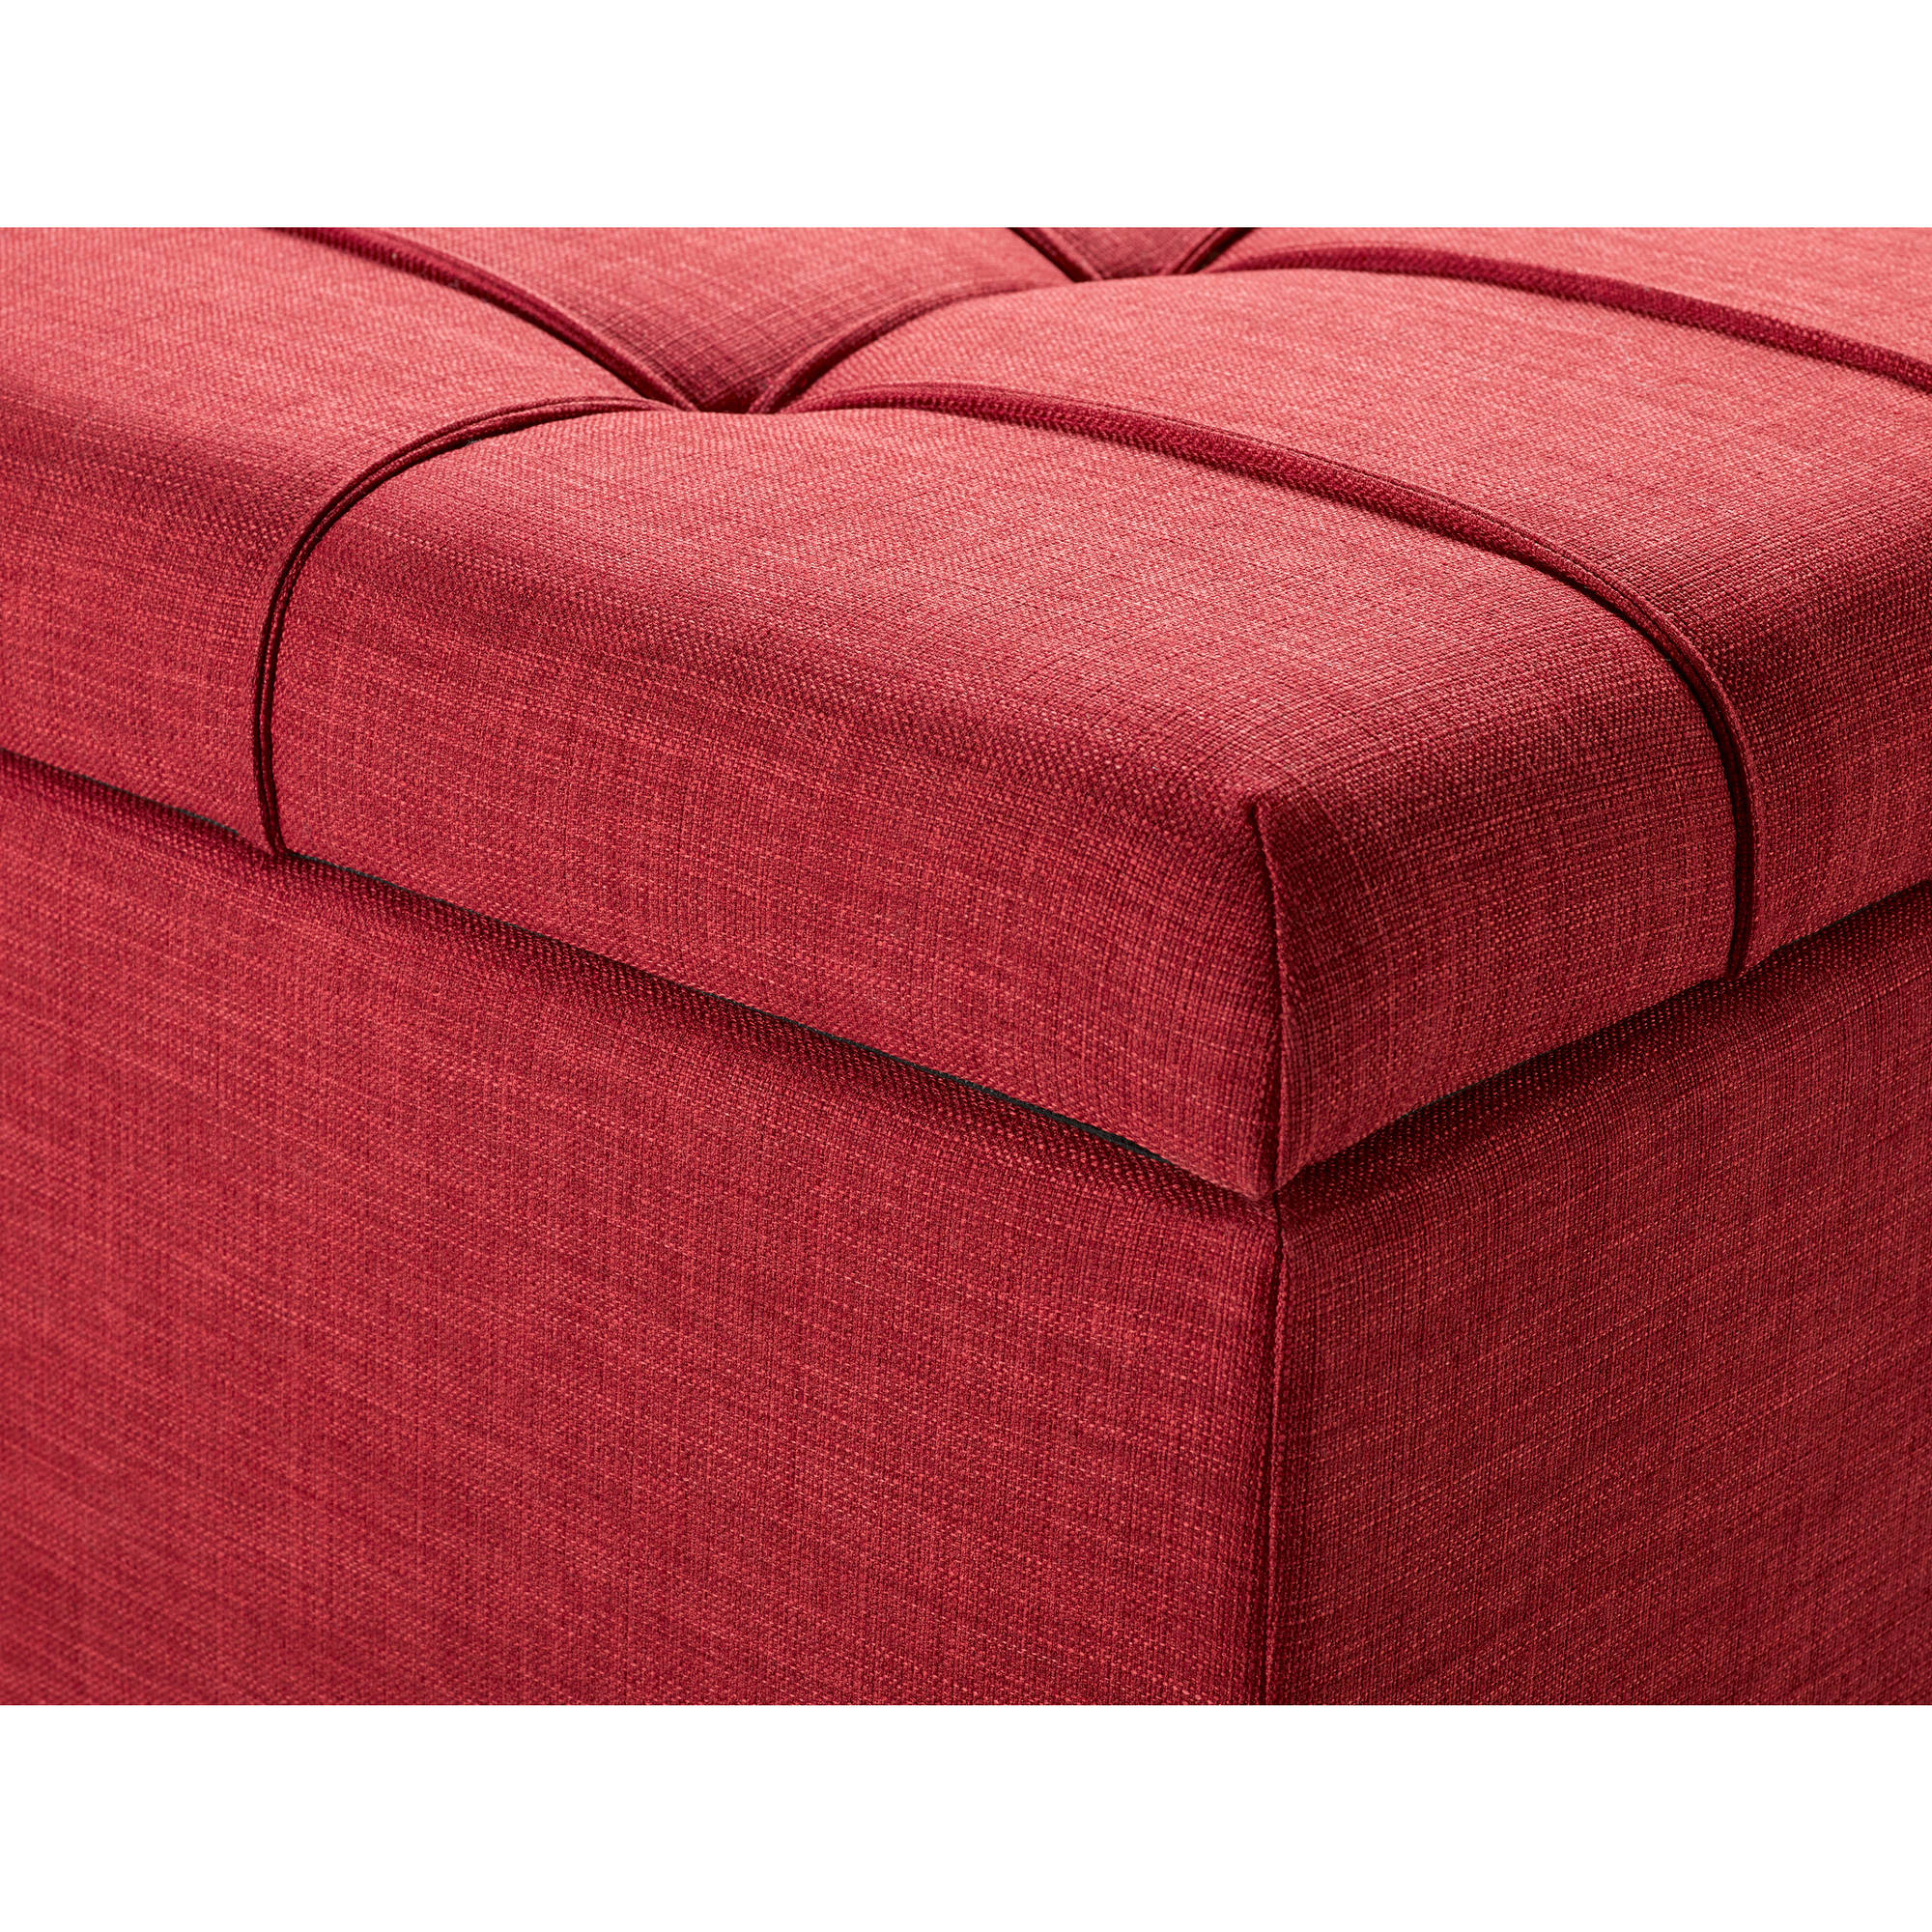 Better Homes & Gardens Pintucked Storage Bench, Red - image 5 of 5